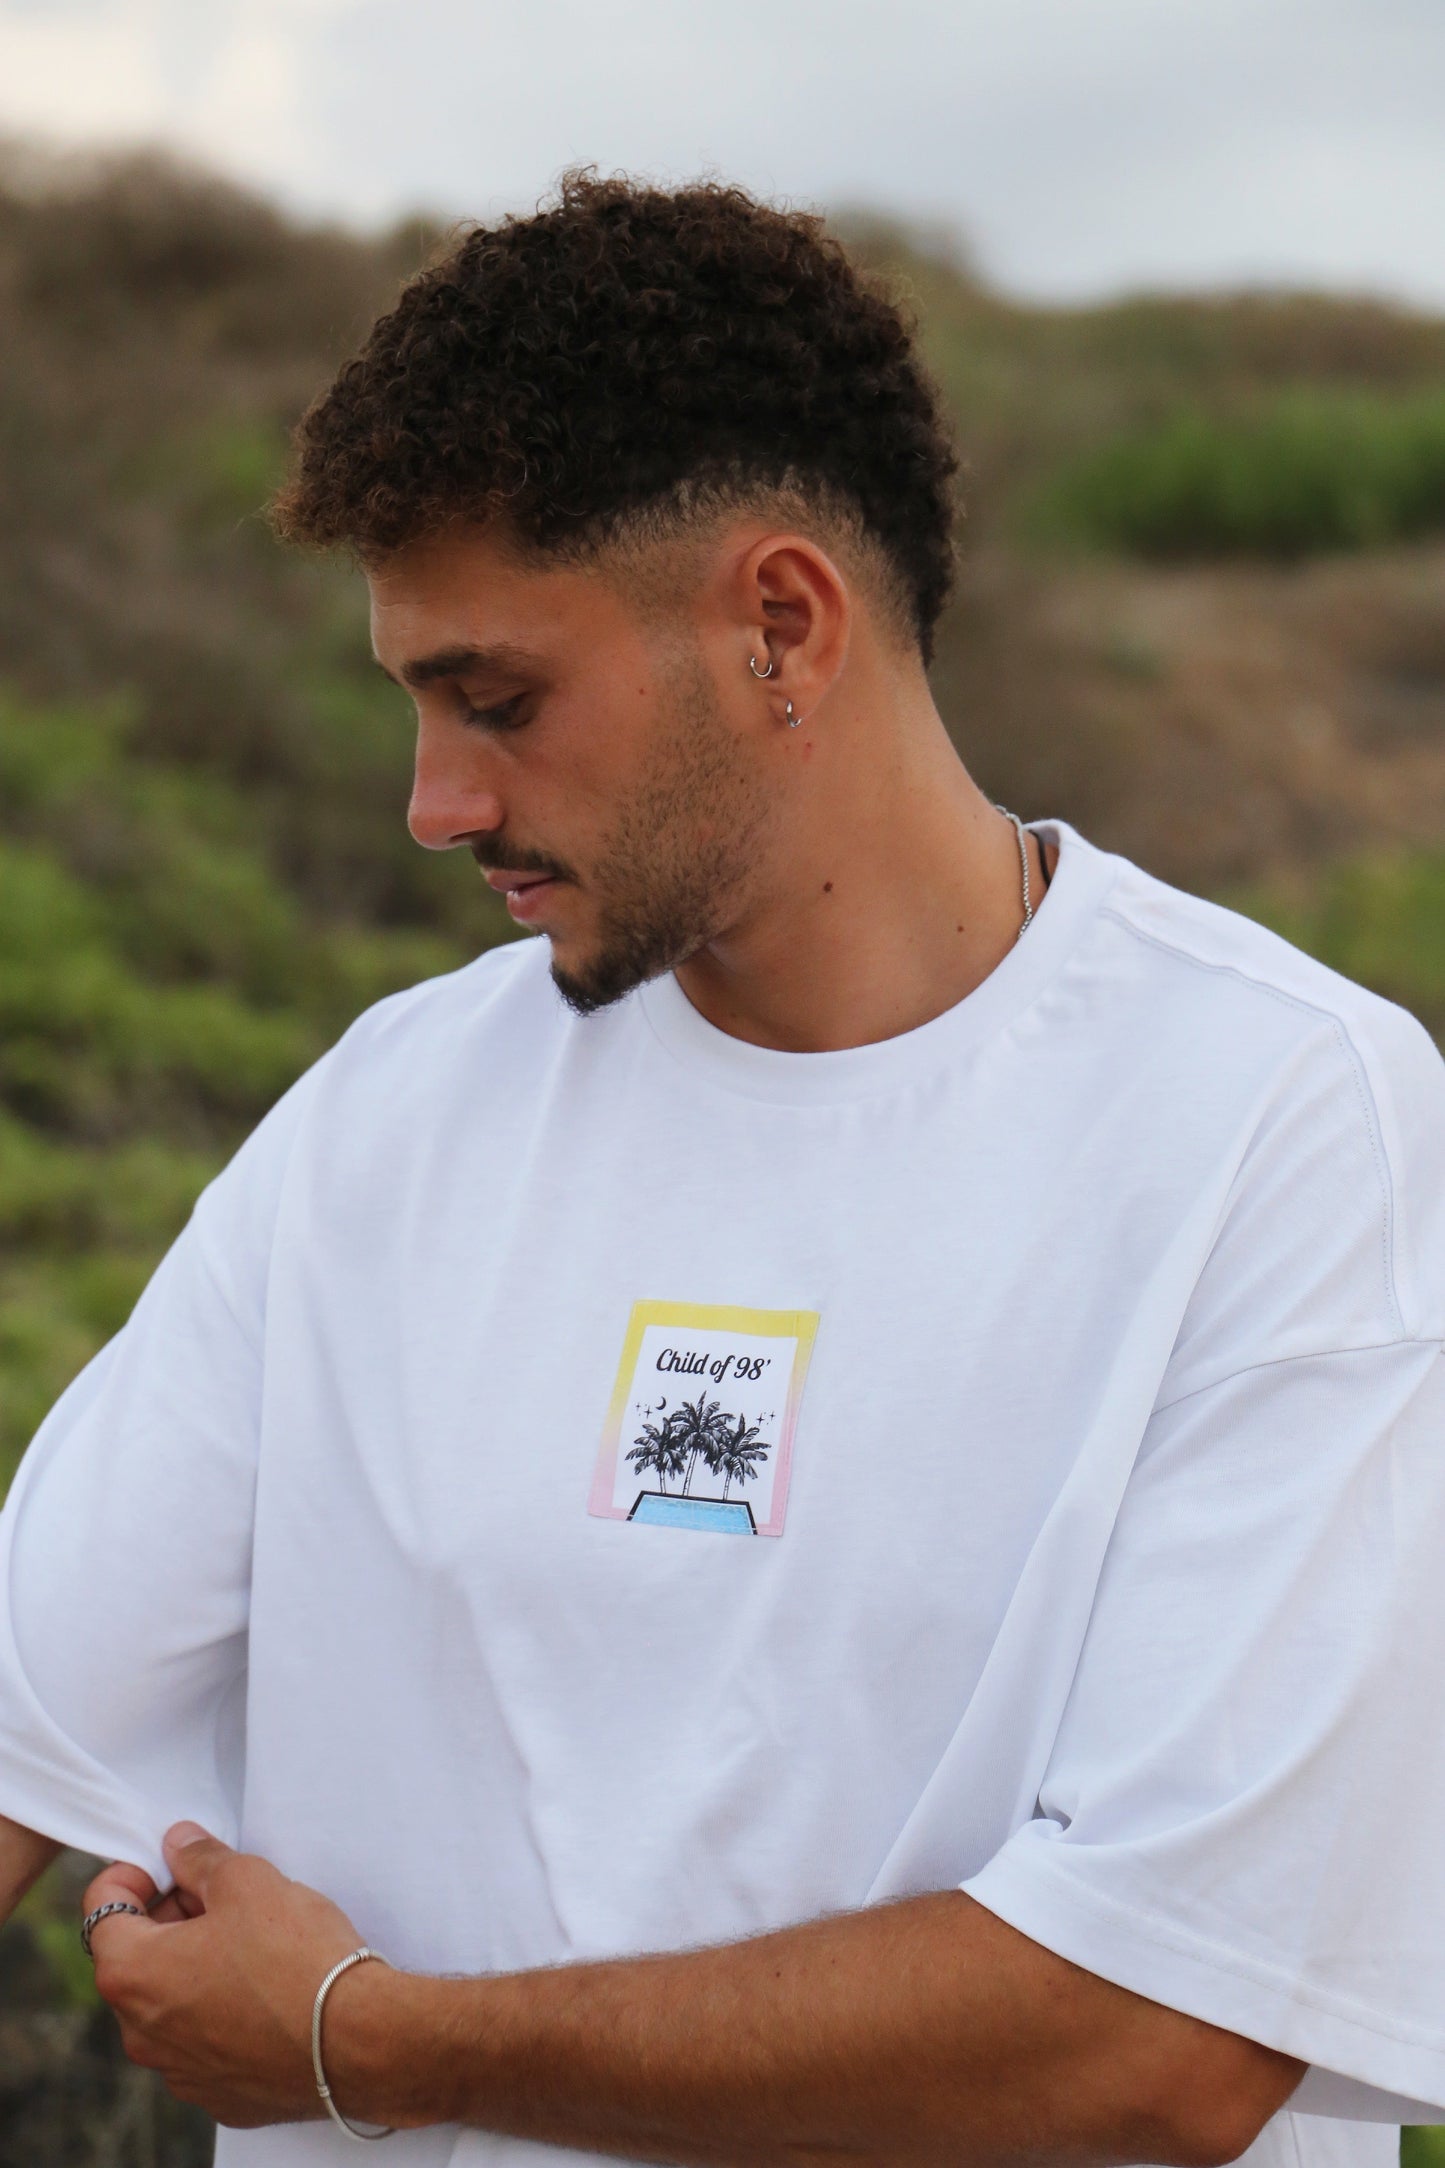 Child of 98' official logo T-shirt - White “inspired by the fear of being average“